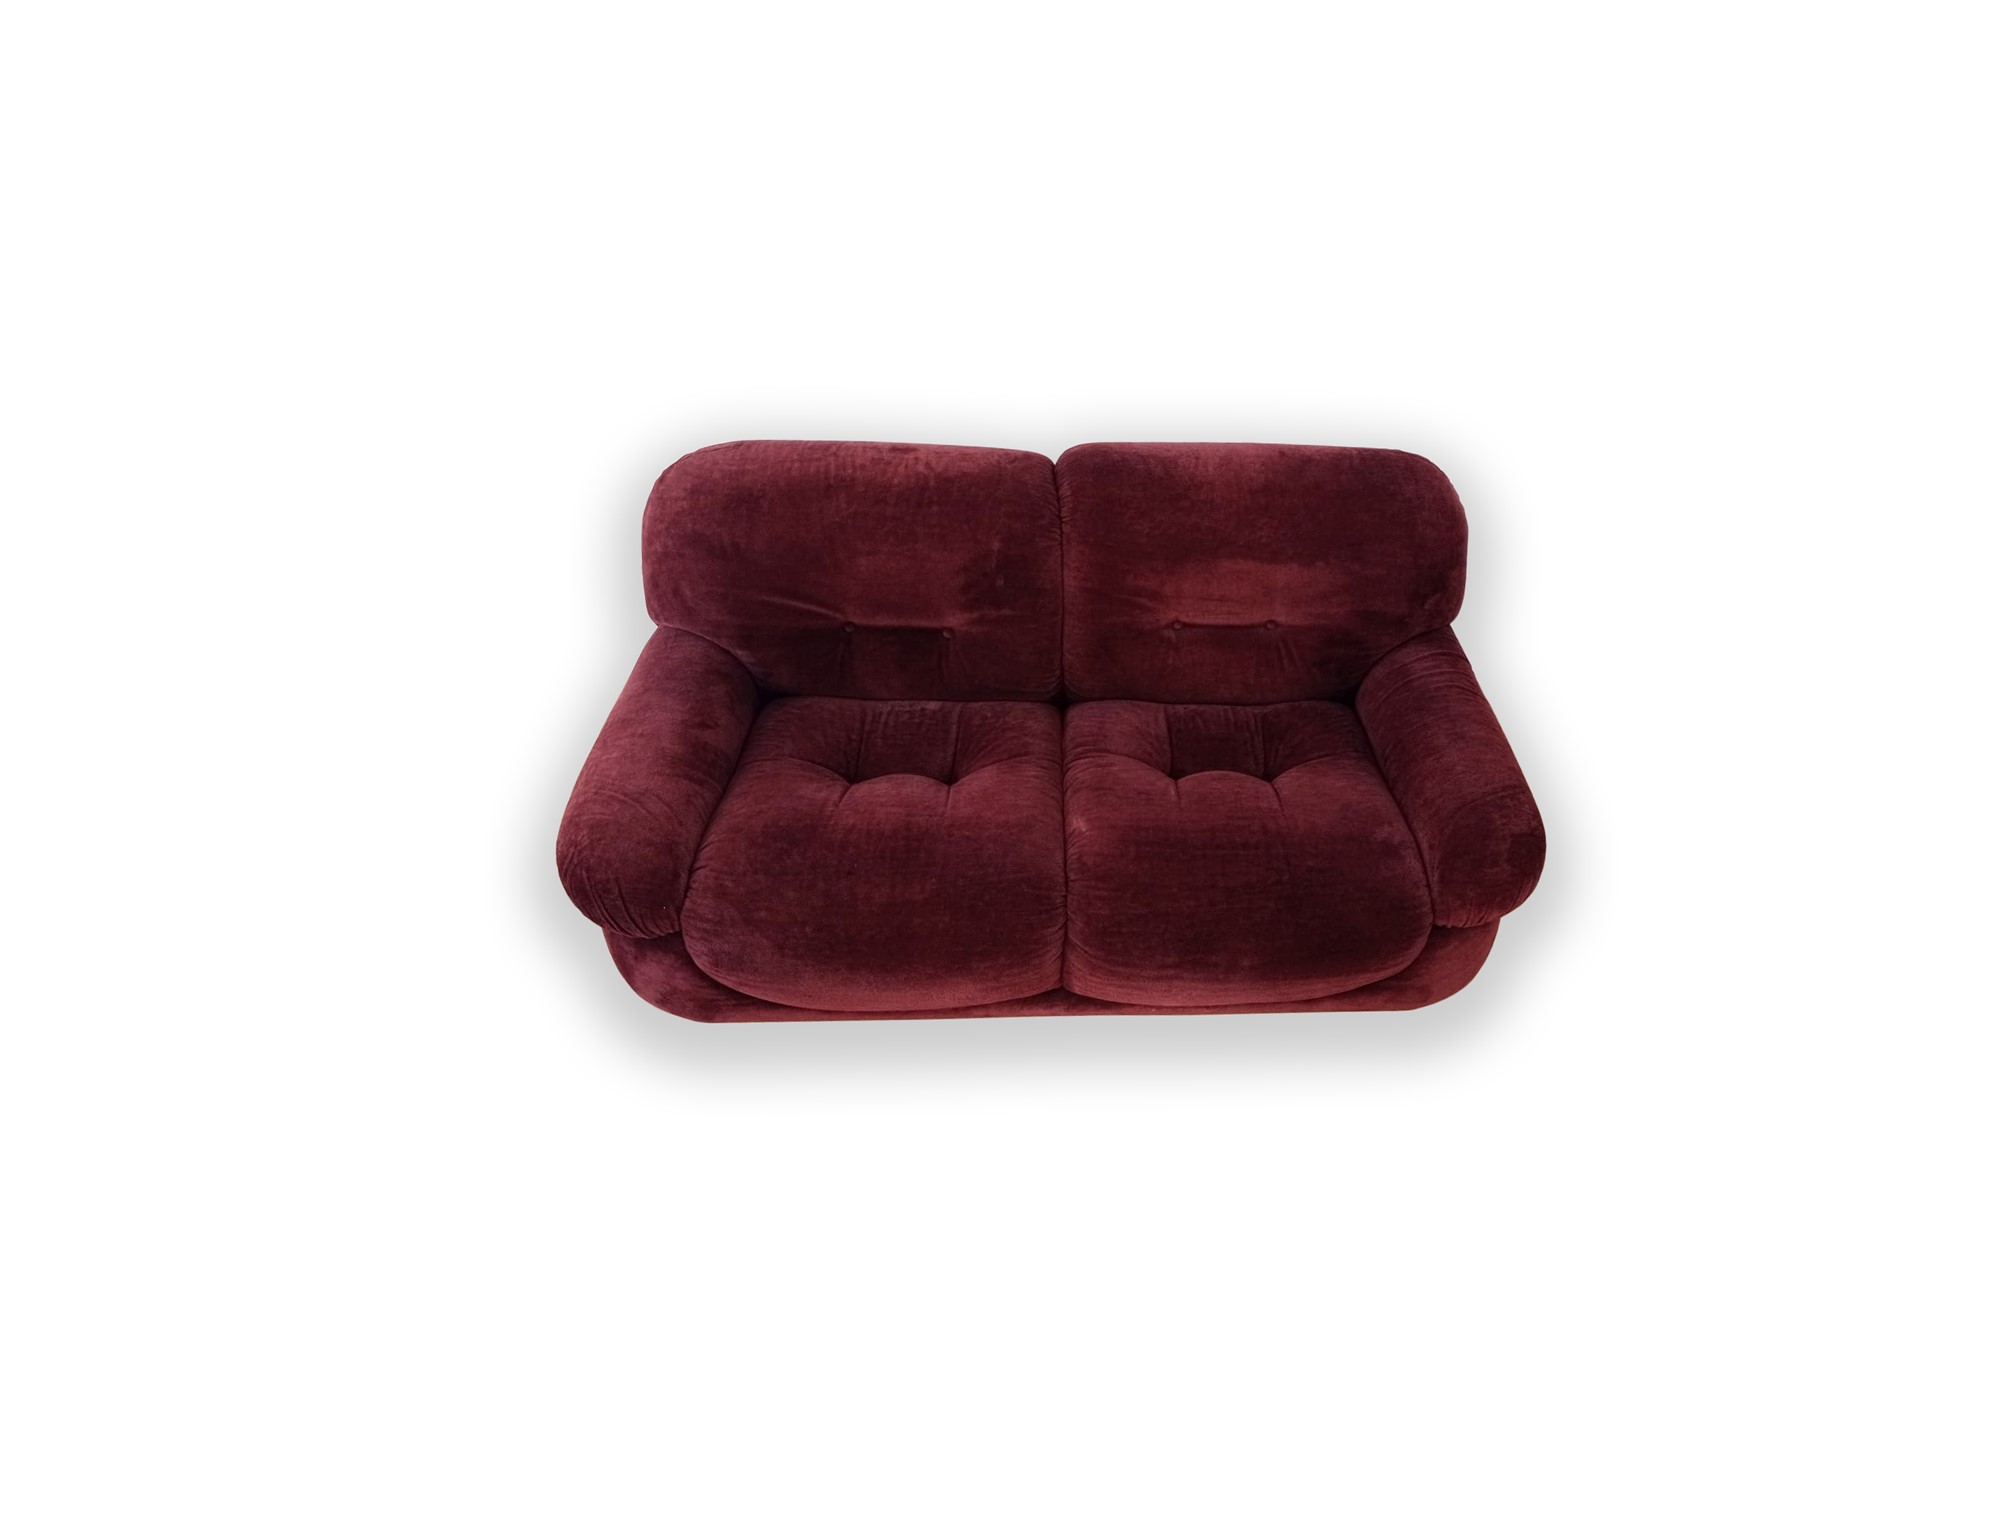 Two seater Sapporo sofa - Image 7 of 11